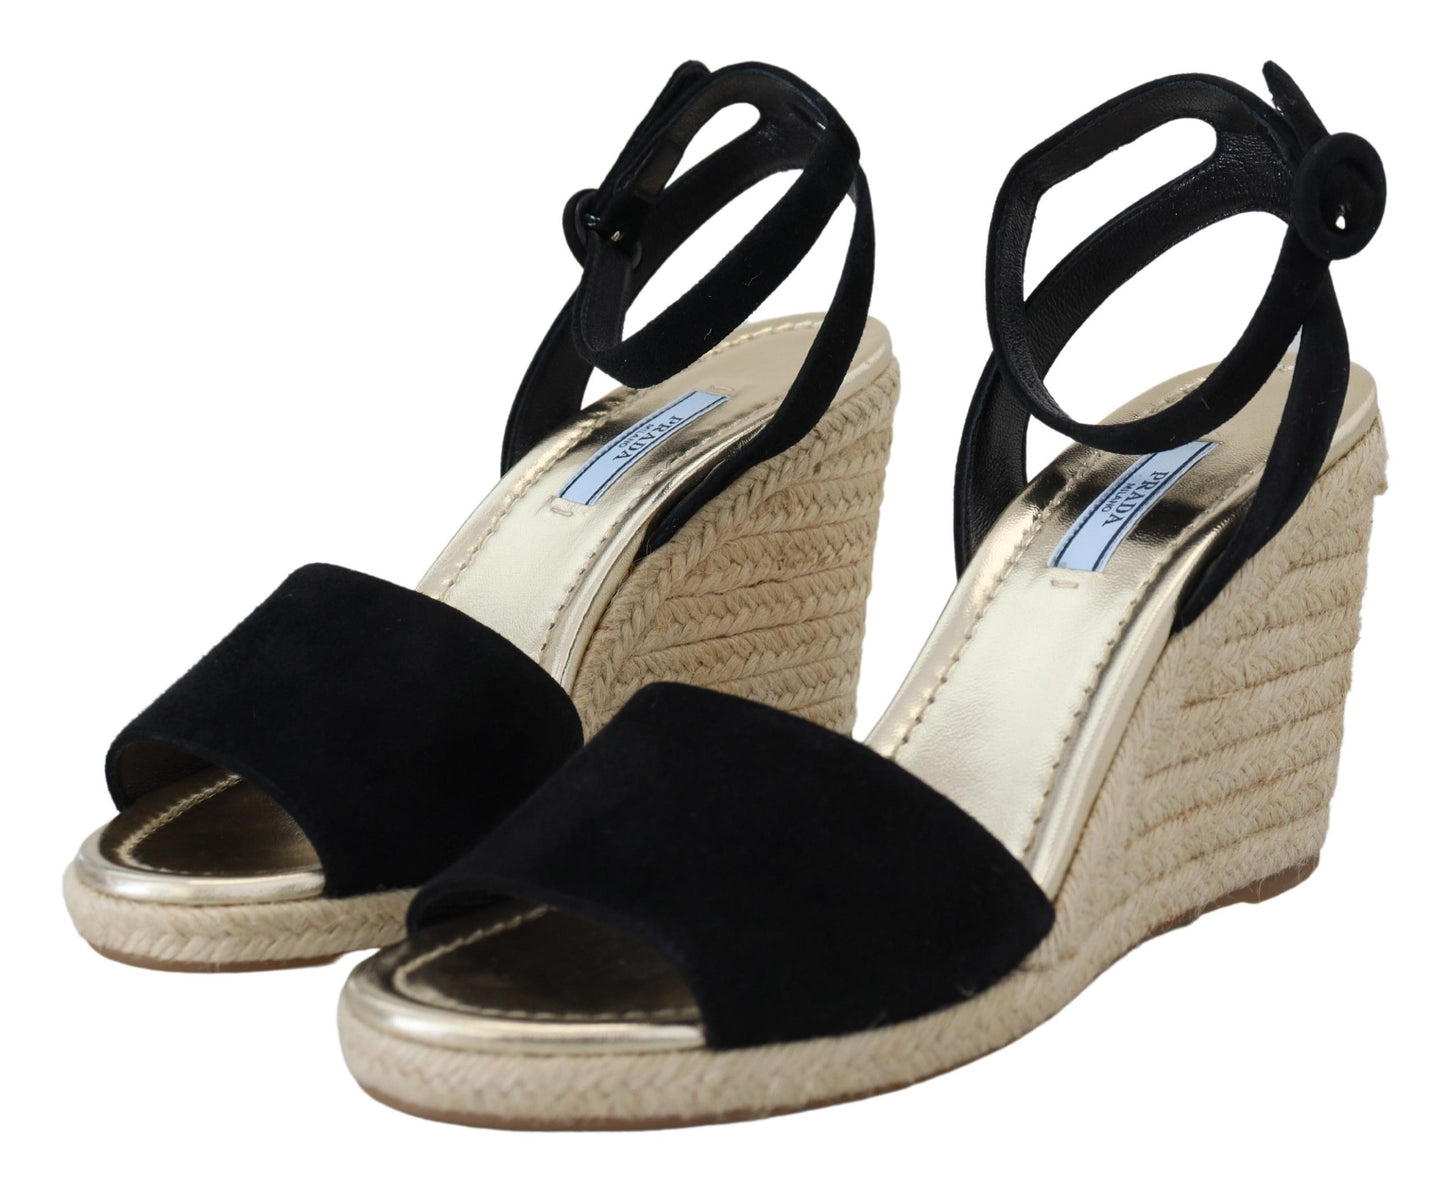 Chic Ankle Strap Suede Wedge Sandals